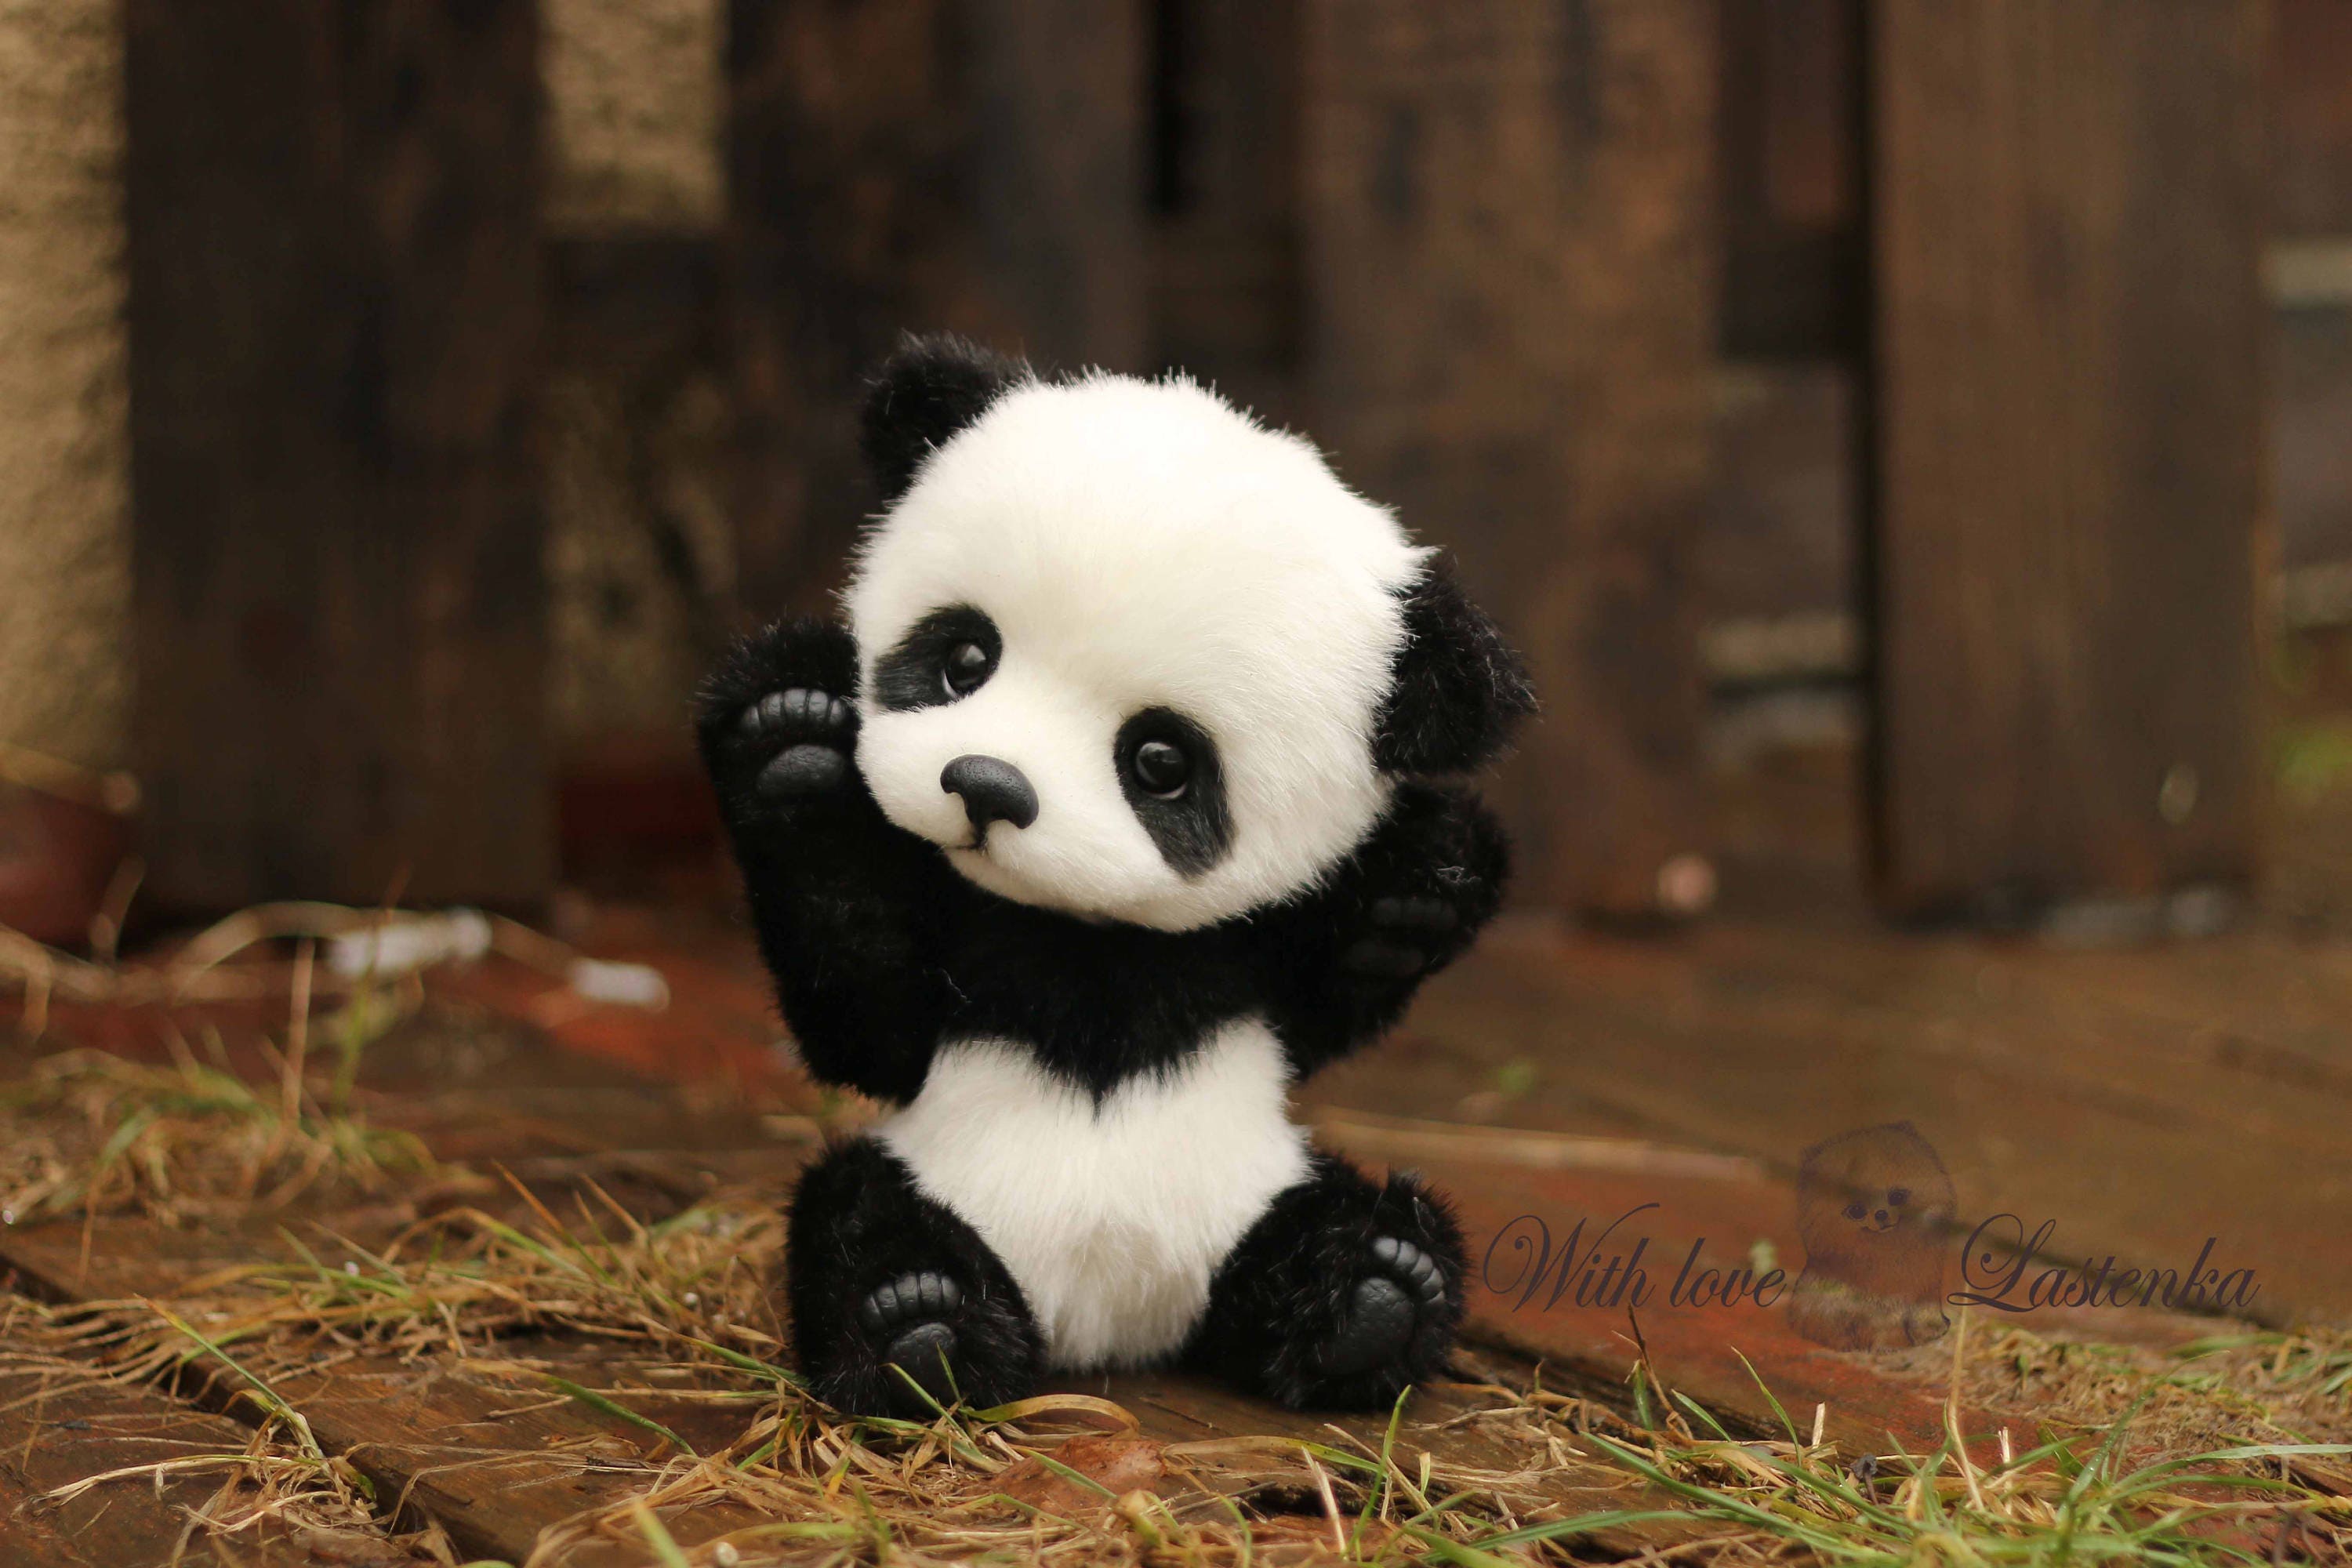 REALISTIC PLUSH PANDA, Stuffed Handmade Soft Toy, Collectible Ooak Plush  Toys, Cute Stuffed Bear Toy for Gifts made to Order 